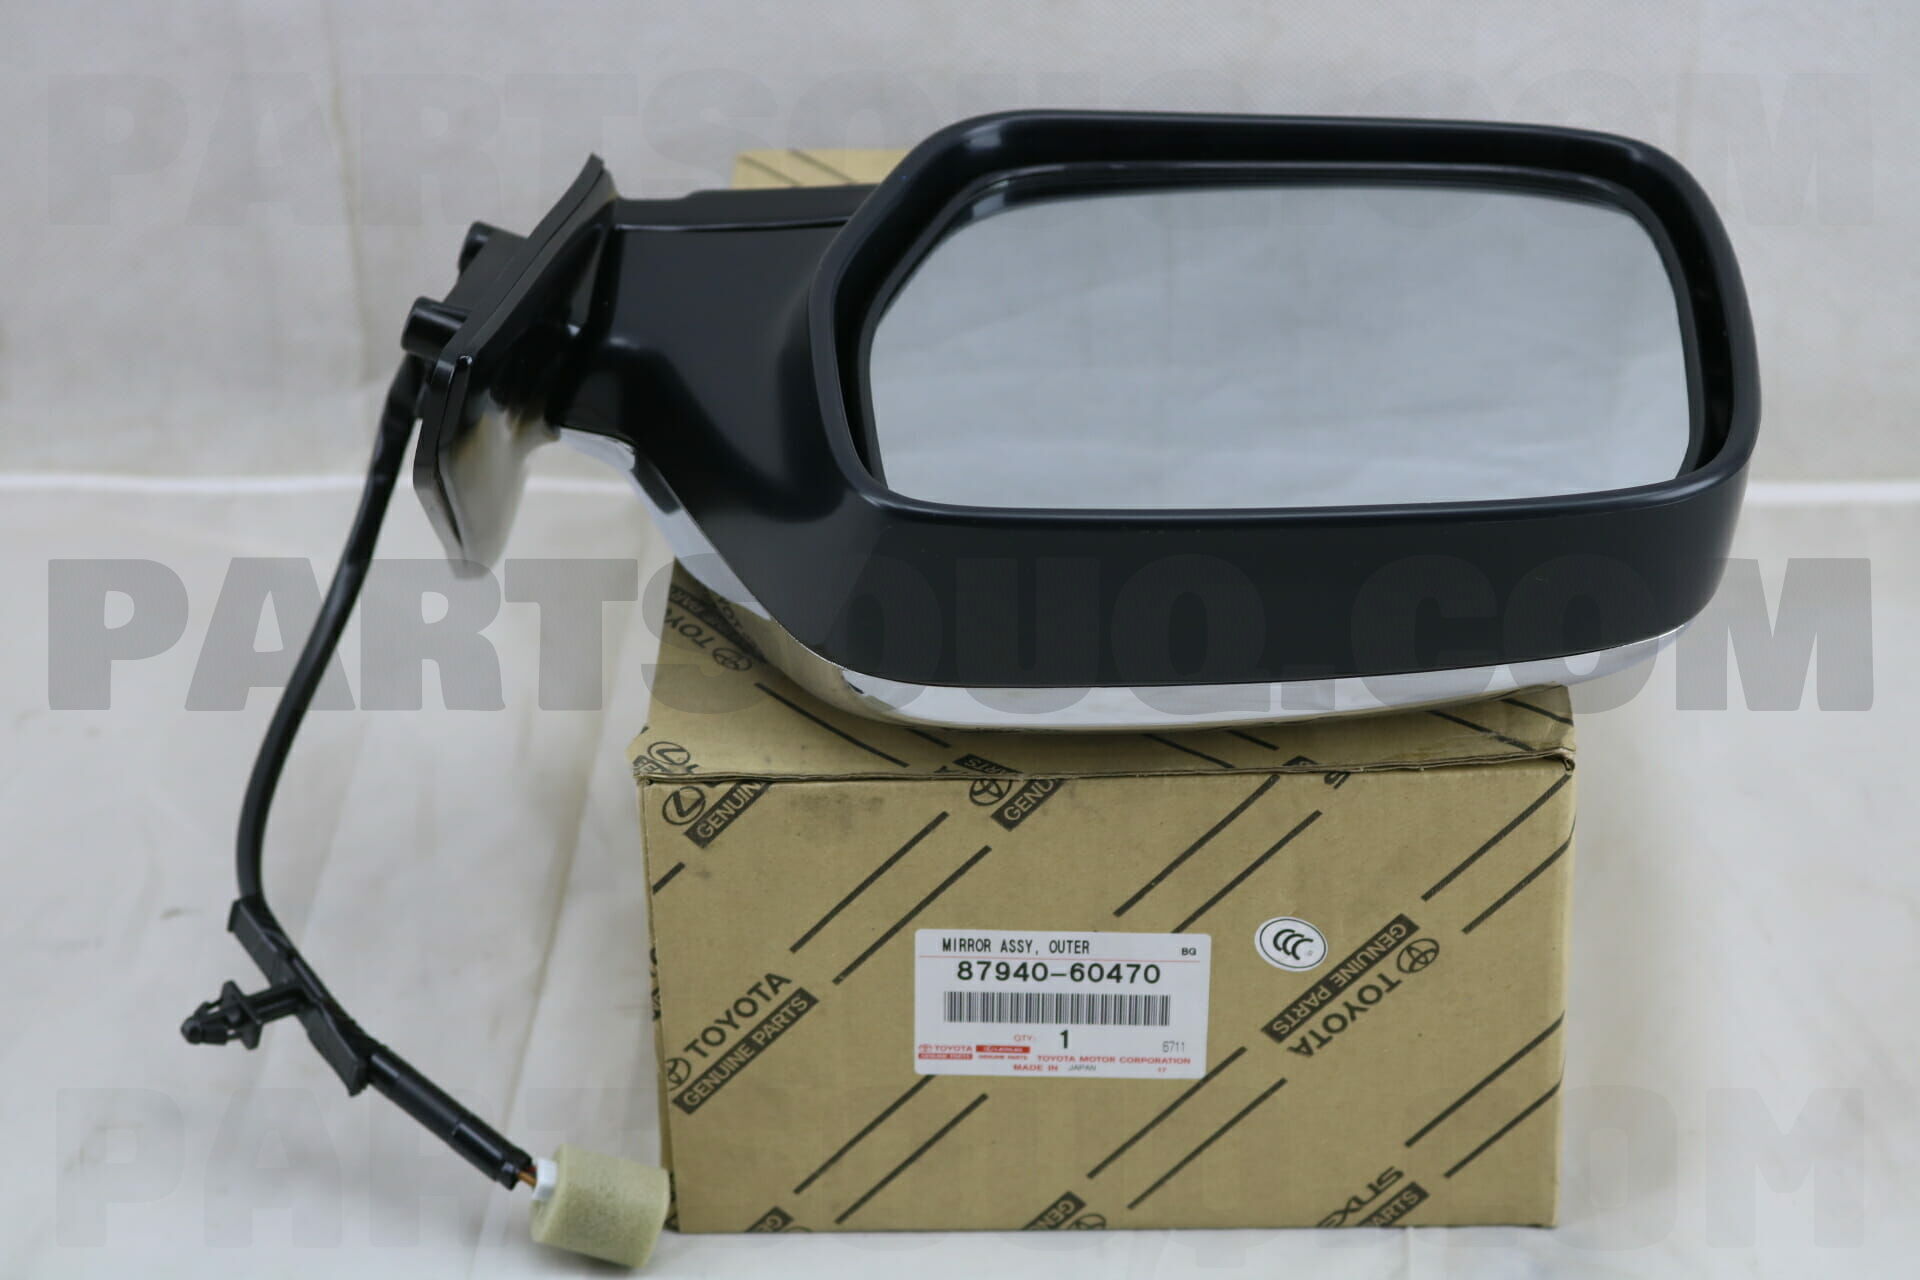 Genuine Toyota 87940-0T072-B4 Rear View Mirror Assembly 